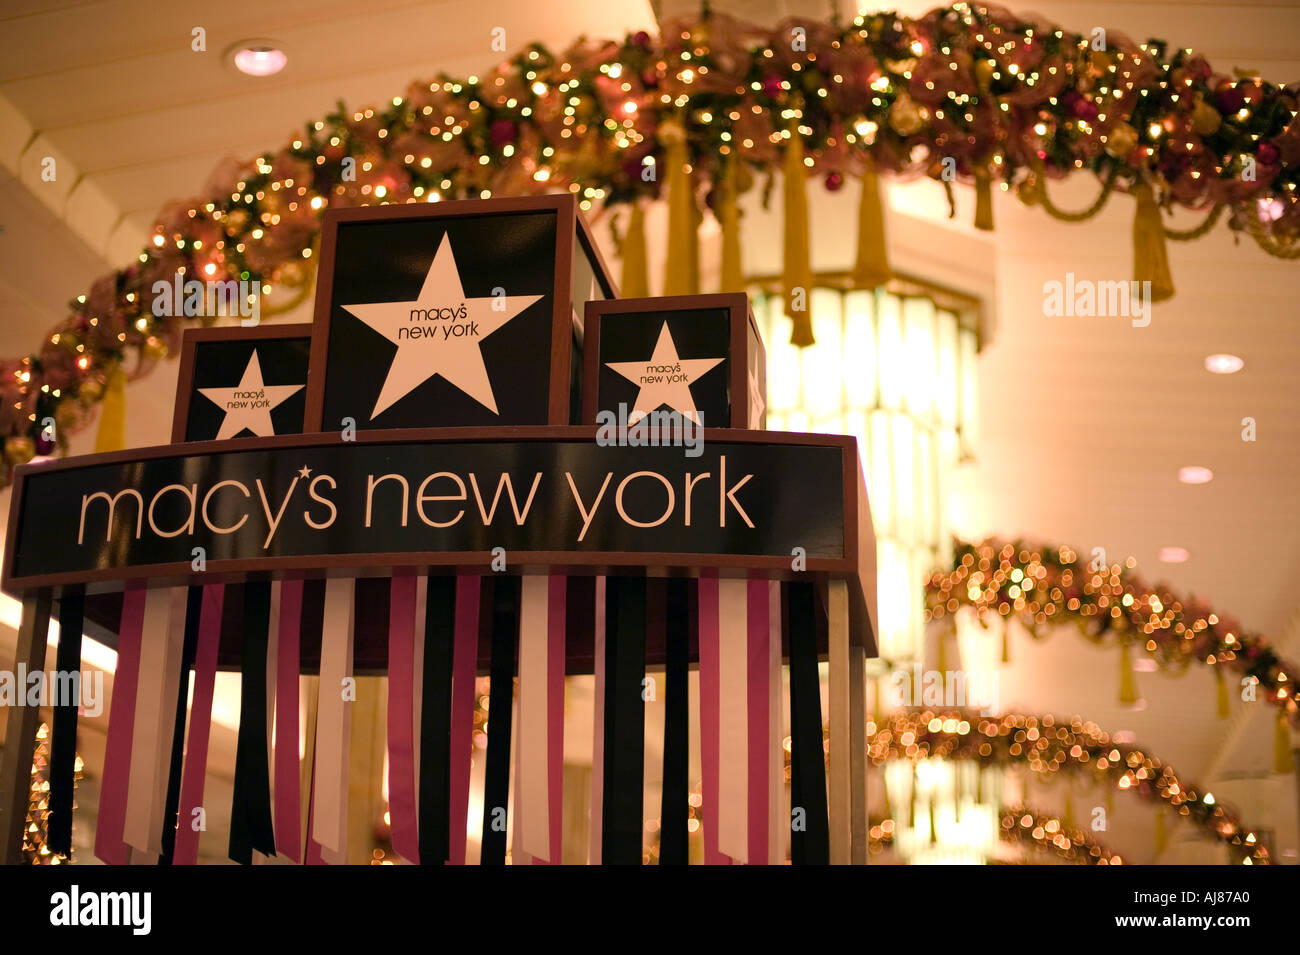 Christmas Holiday decorations inside Macy s Department Store at Stock Photo: 1214367 - Alamy